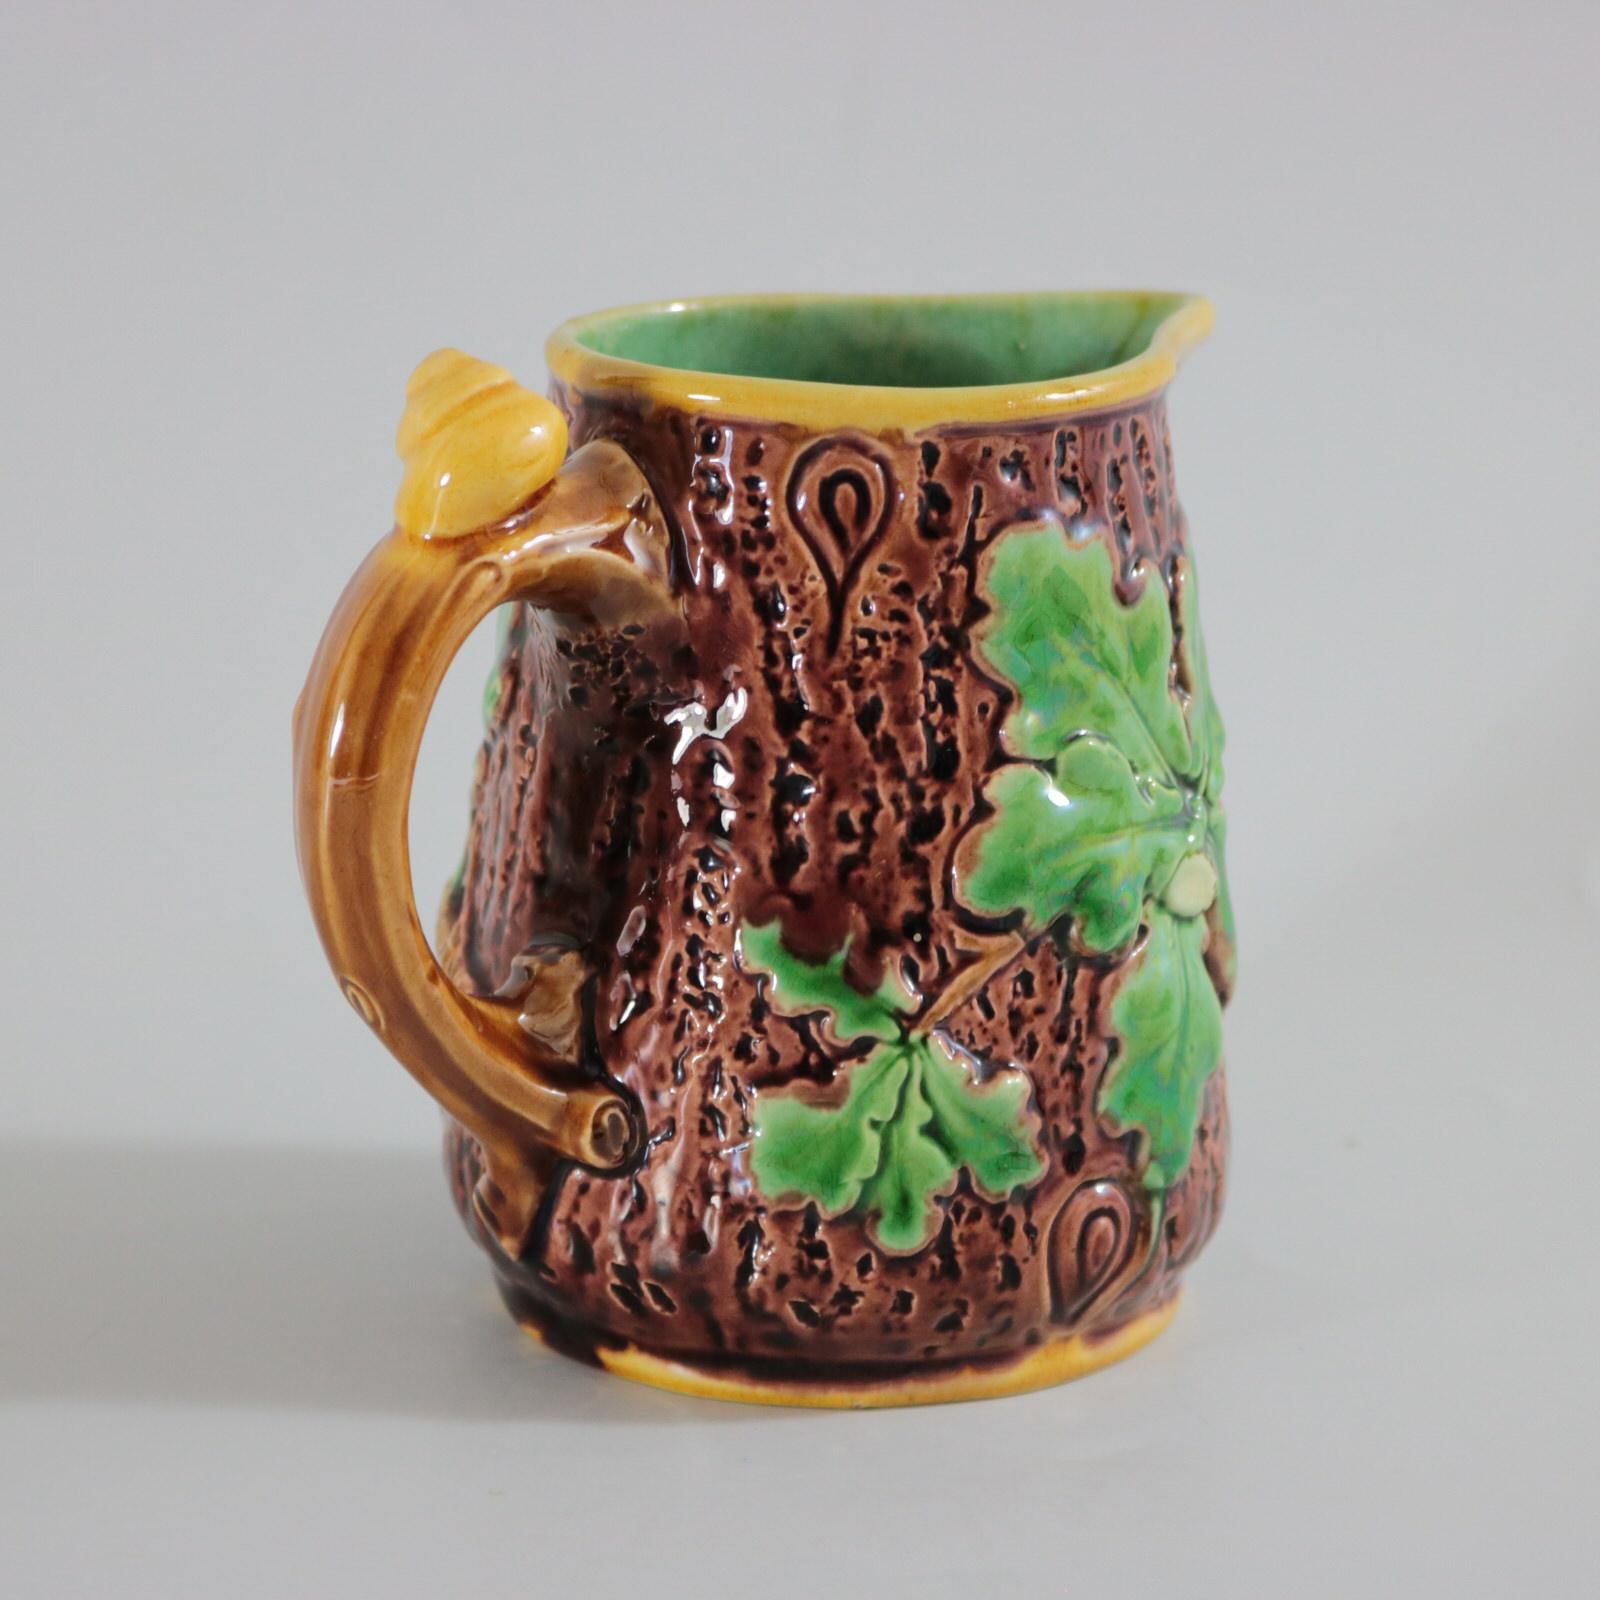 Mid-19th Century Small Minton Majolica Oak Jug/Pitcher with Snail Handle